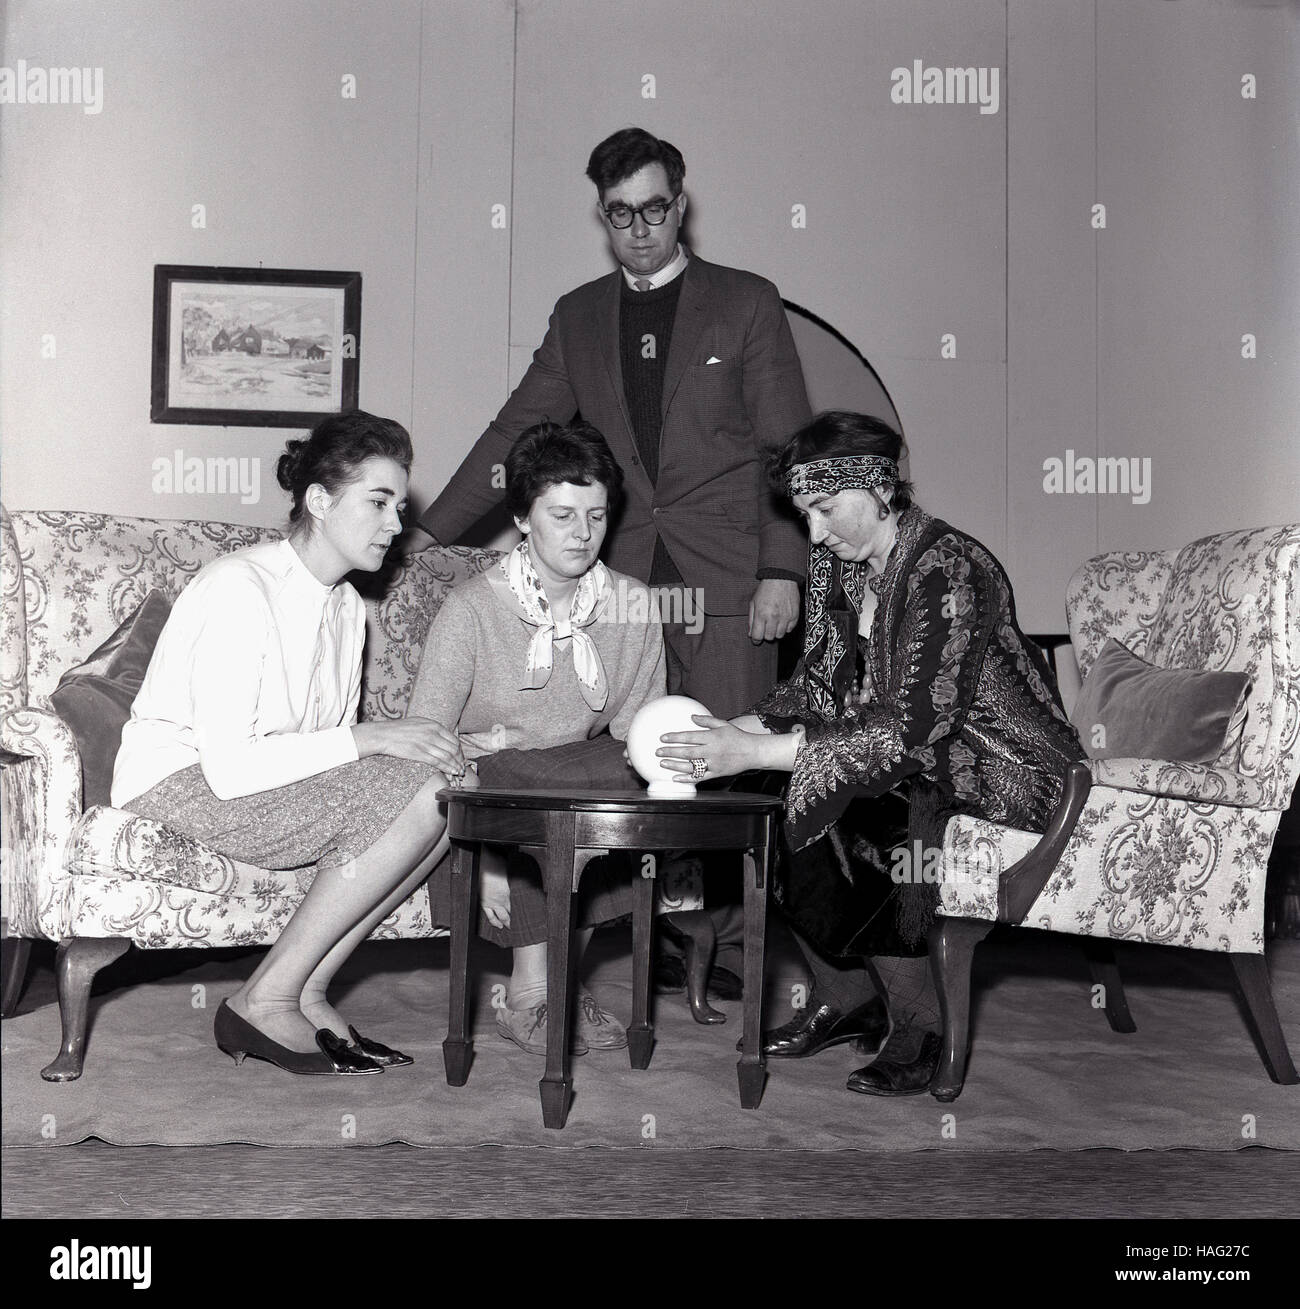 1965, historical, communicating with the spirits sixties style, in the picture we see a female spiritualist medium or pyschic with a light bowl conducting a seance with two ladies. Stock Photo